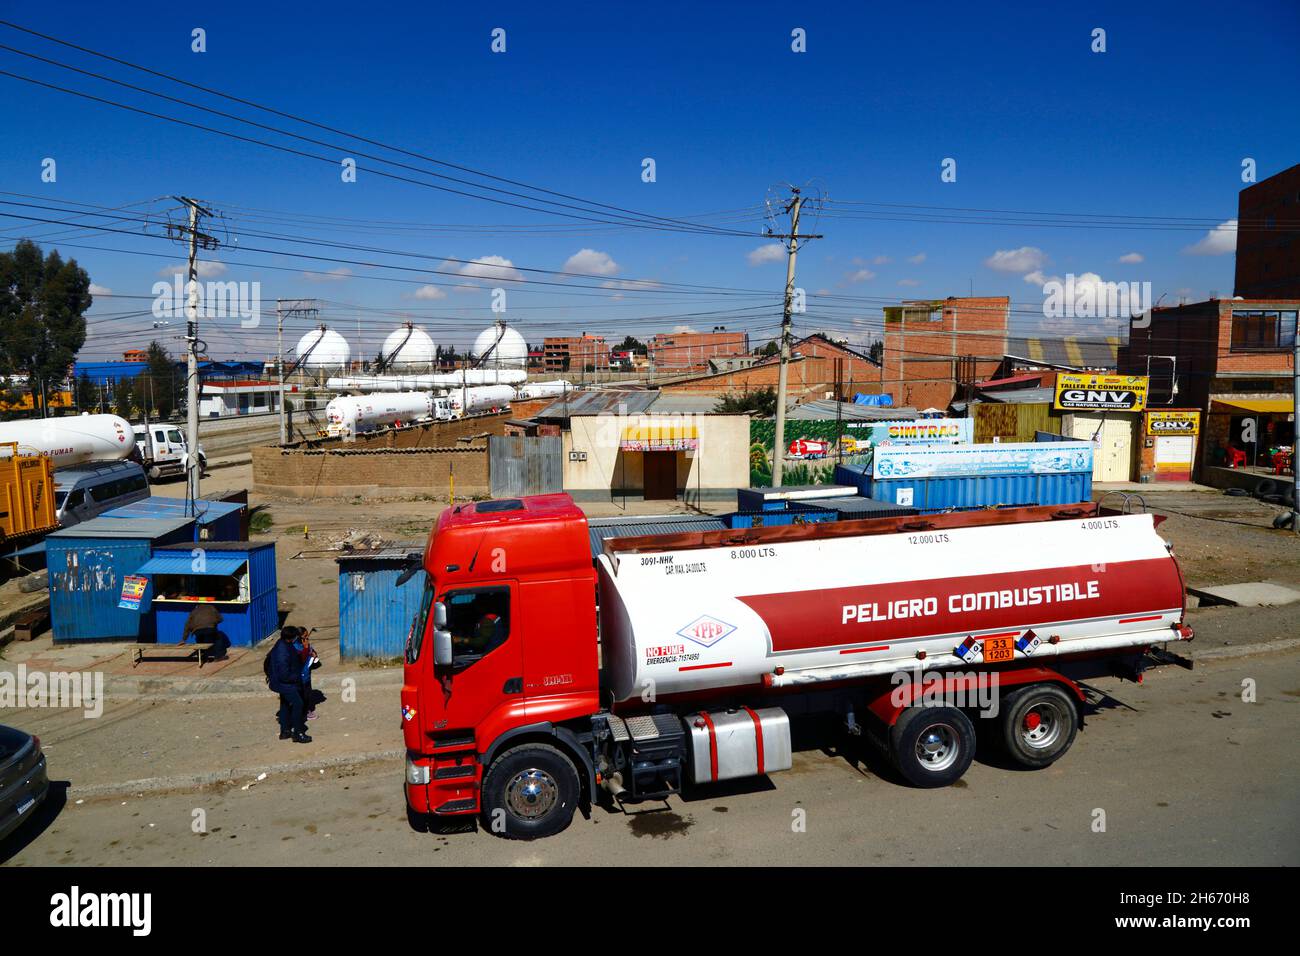 Senkata, El Alto, Bolivia. 13th November 2021. A fuel tank truck waits outside the Senkata Fuel Plant on Av 6 de Marzo / Camino Oruro in El Alto. Yacimientos Petrolíferos Fiscales Bolivianos (YPFB, Bolivia's state owned oil and gas company) have a large refinery and storage plant here, which supplies La Paz; El Alto and the surrounding area with petrol / gasoline, diesel and liquid natural gas (in bottles for domestic use and also for vehicles and other industries). In the background are some Liquid Natural Gas tank trucks and spherical gas storage tanks. Stock Photo